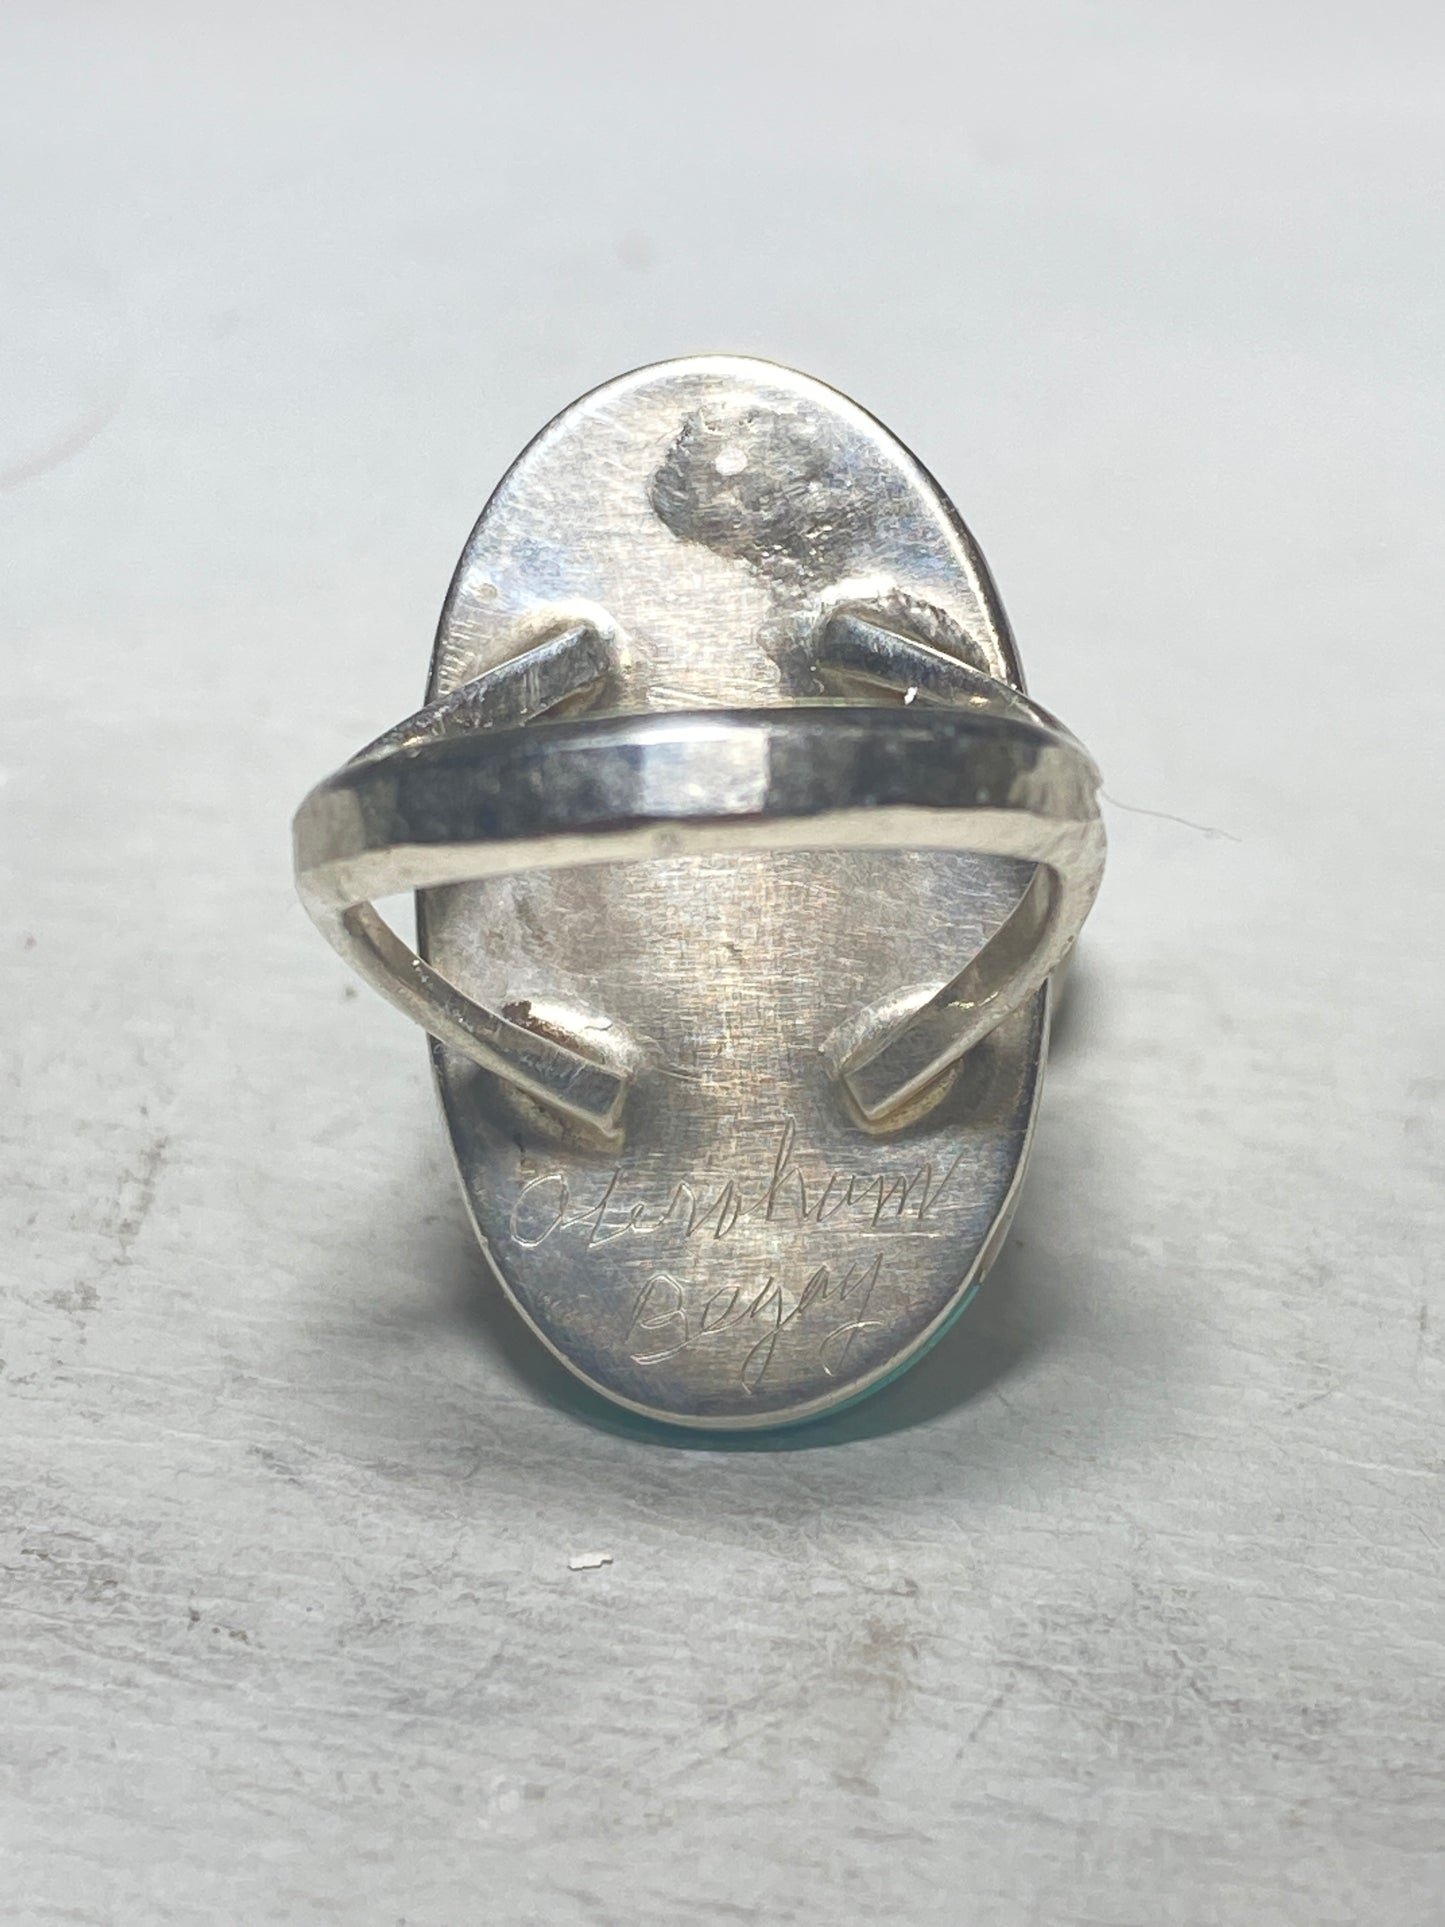 Abalone Ring turquoise sterling silver southwest women Abraham Begay